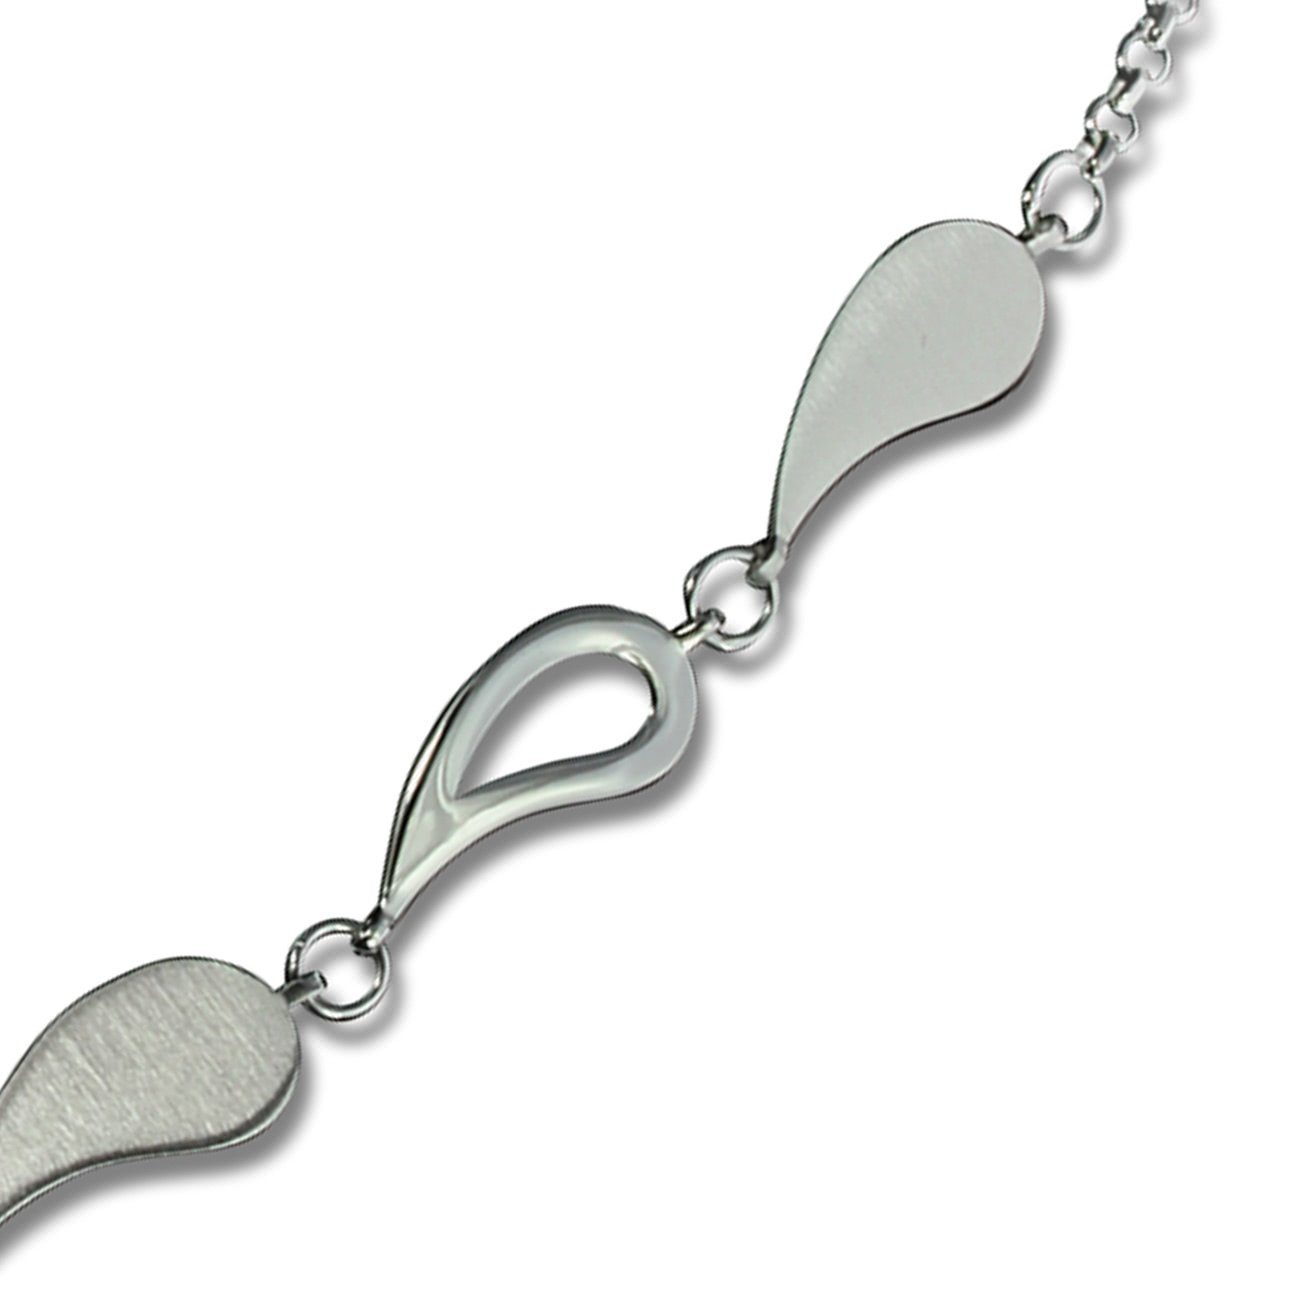 SilberDream Collier SDK4901JX Silber, Sterling verschiedene 925 SilberDream Colliers silber 45cm, Designs, (Träne) Farbe: ca